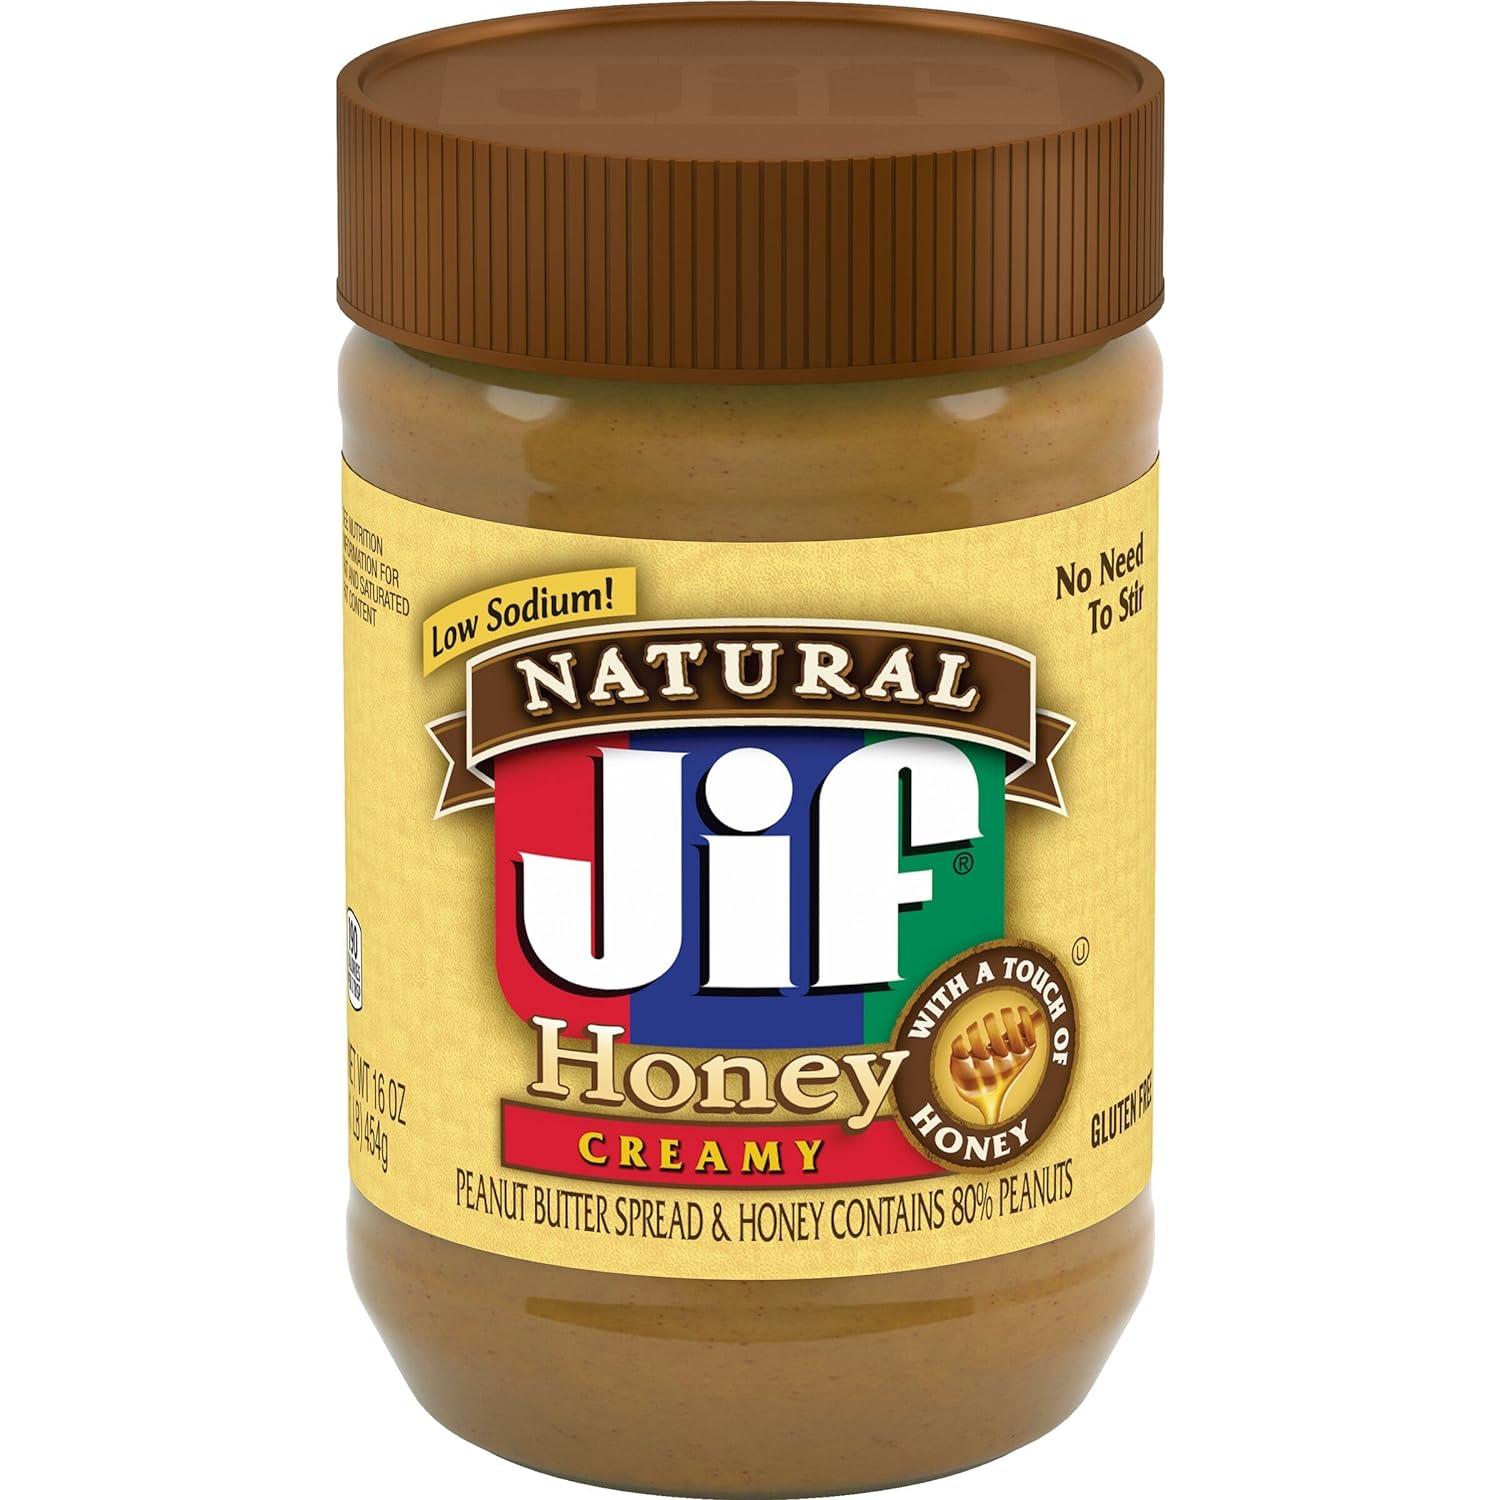 Jif Natural Creamy Peanut Butter Spread and Honey for $1.94